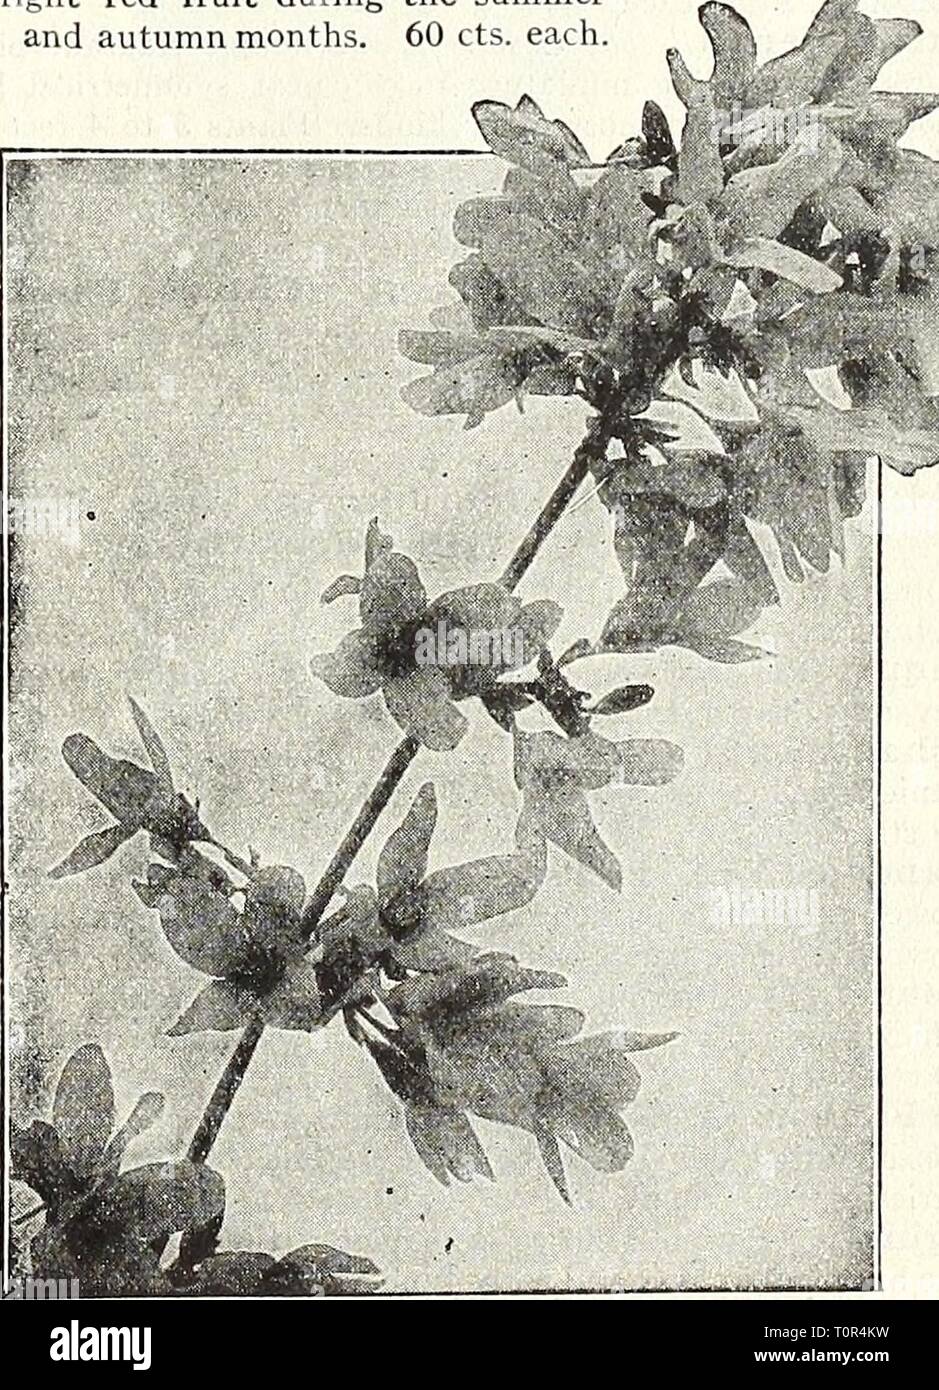 Dreer's autumn catalogue 1931 (1931) Dreer's autumn catalogue 1931  dreersautumncata1931henr Year: 1931  Deutzia Lemoinei ESeagOtlS (Japanese Oleaster) Longipes. A very desin ble, nearly evergreen Shrub of medium height, with light foliage, which is silvered on the under surface. The abundant crop of orange-colored fruit is a very attractive feature during the summer. 75 cts. each. Elsholtzia (Mintshrub) Stauntoni. Its.late flowering, September and October, makes this a particular^ valuable Shrub. It grows about four feet high, of bushy branching habit, each branch terminated by a dense 4 to 8 Stock Photo